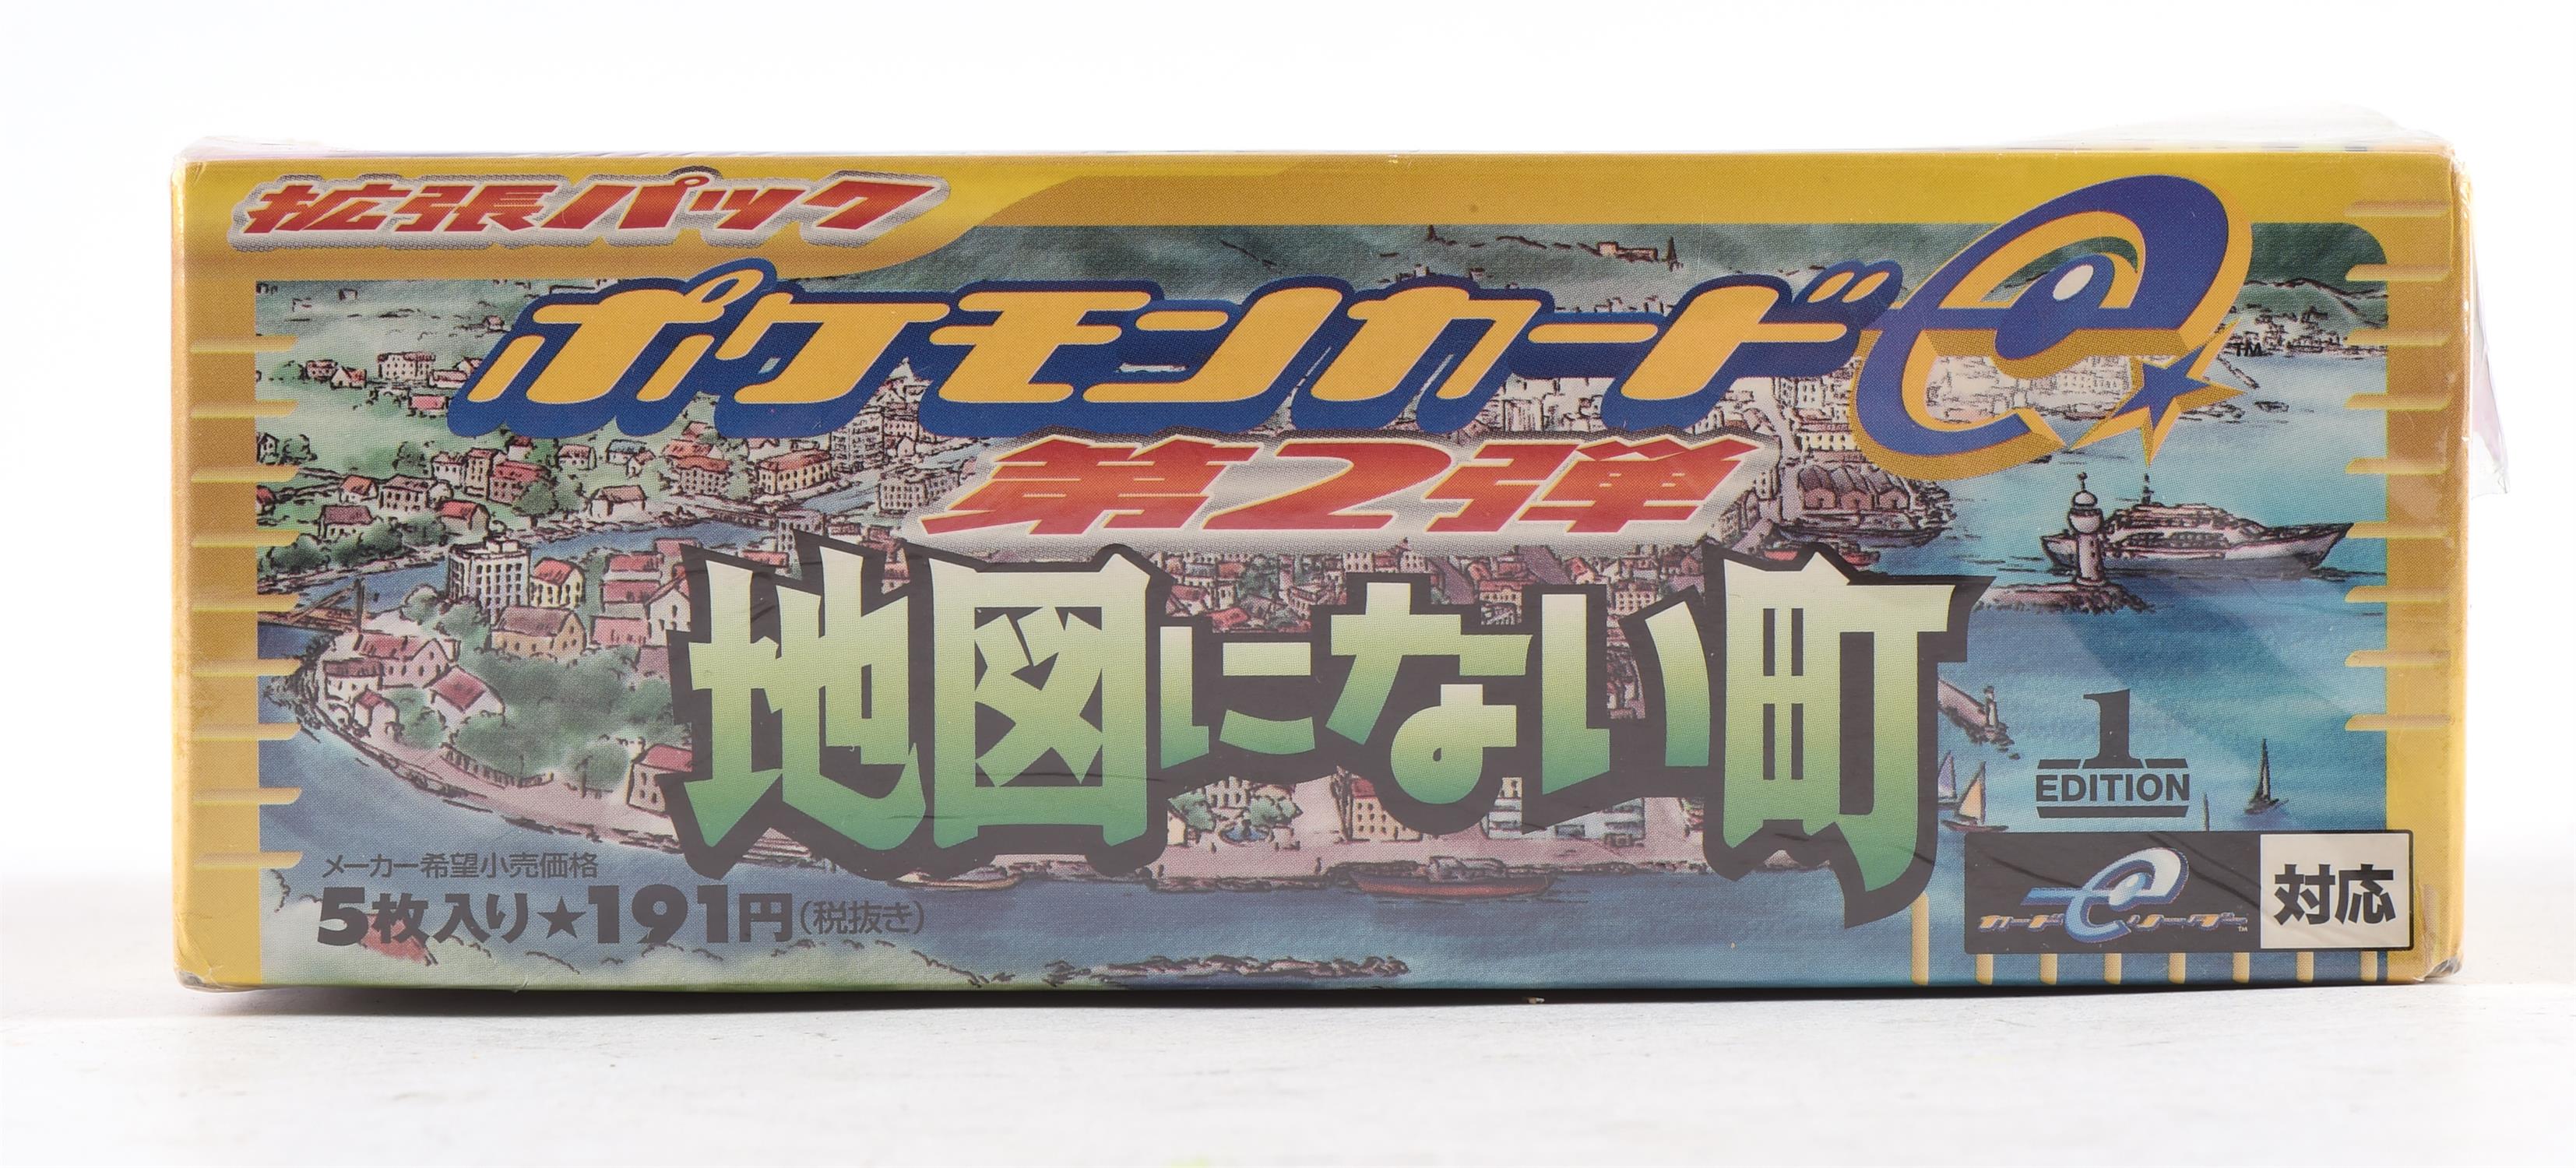 Pokemon TCG. Japanese Town On No Map (Aquapolis), 2002 first edition e-series sealed booster box of - Image 3 of 7